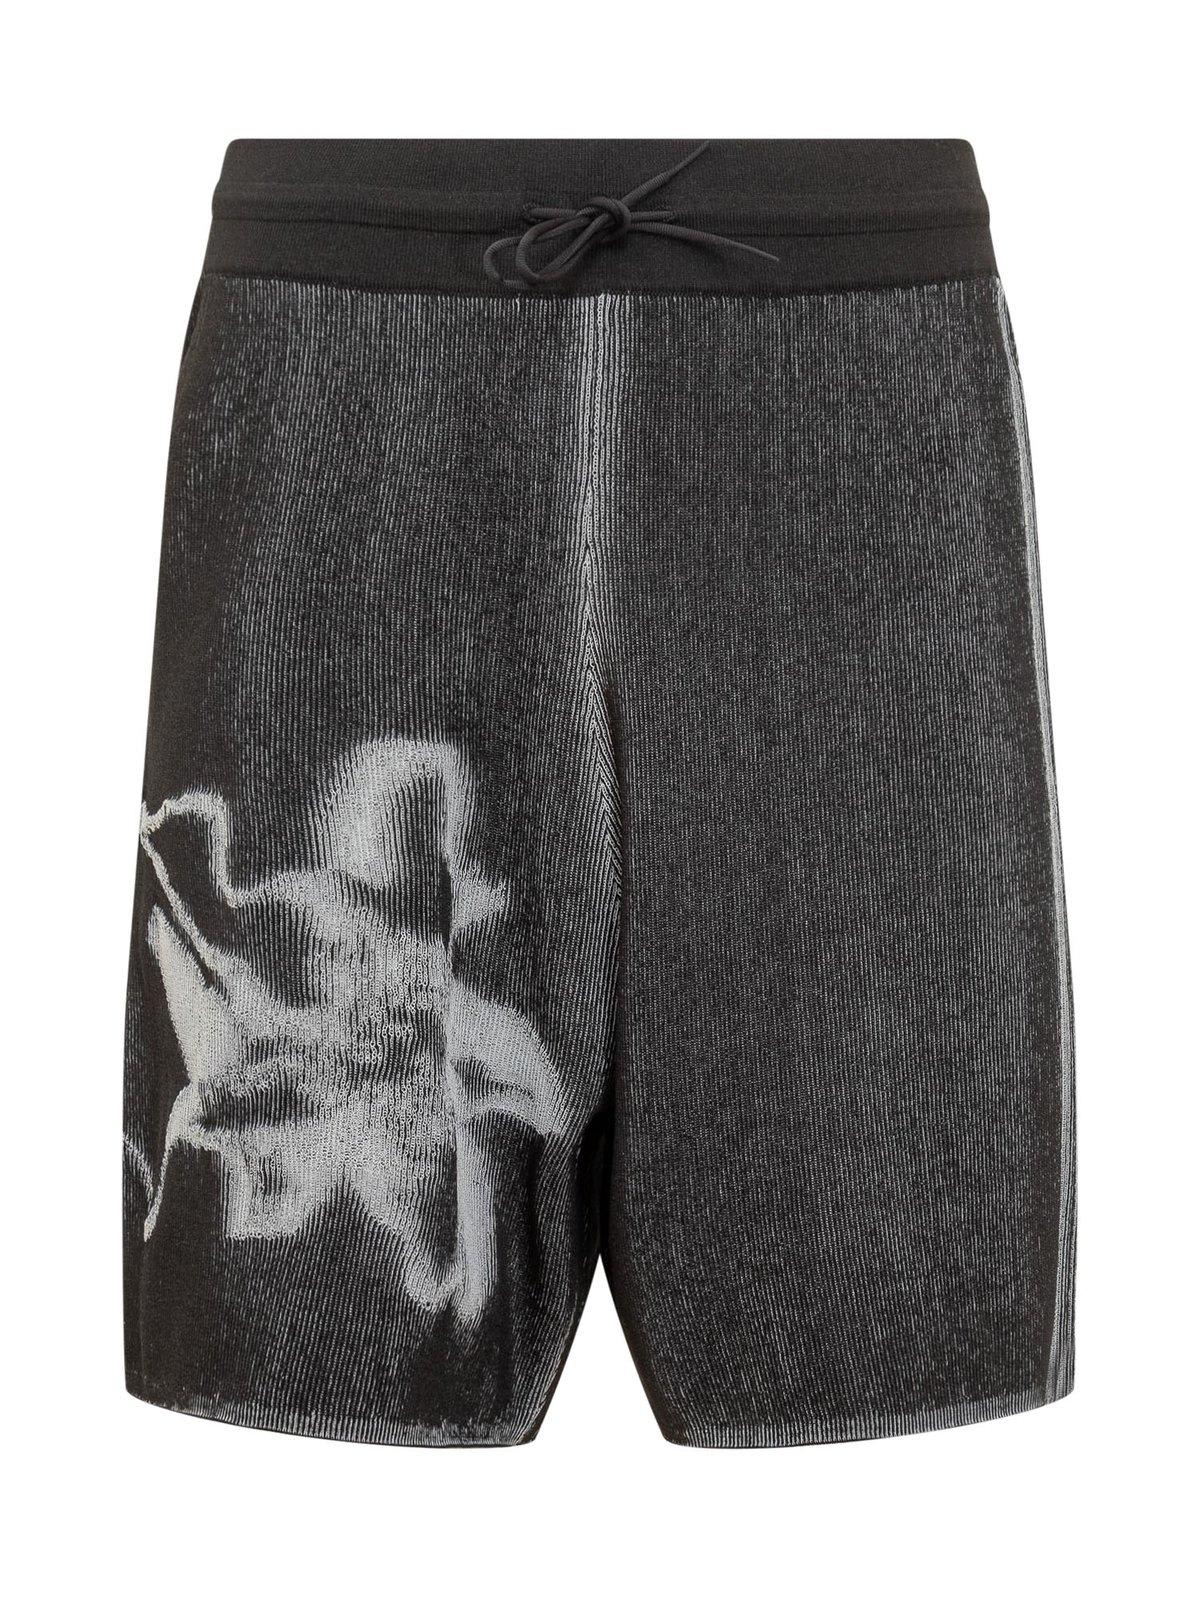 Gfx Relaxed Fit Knit Shorts